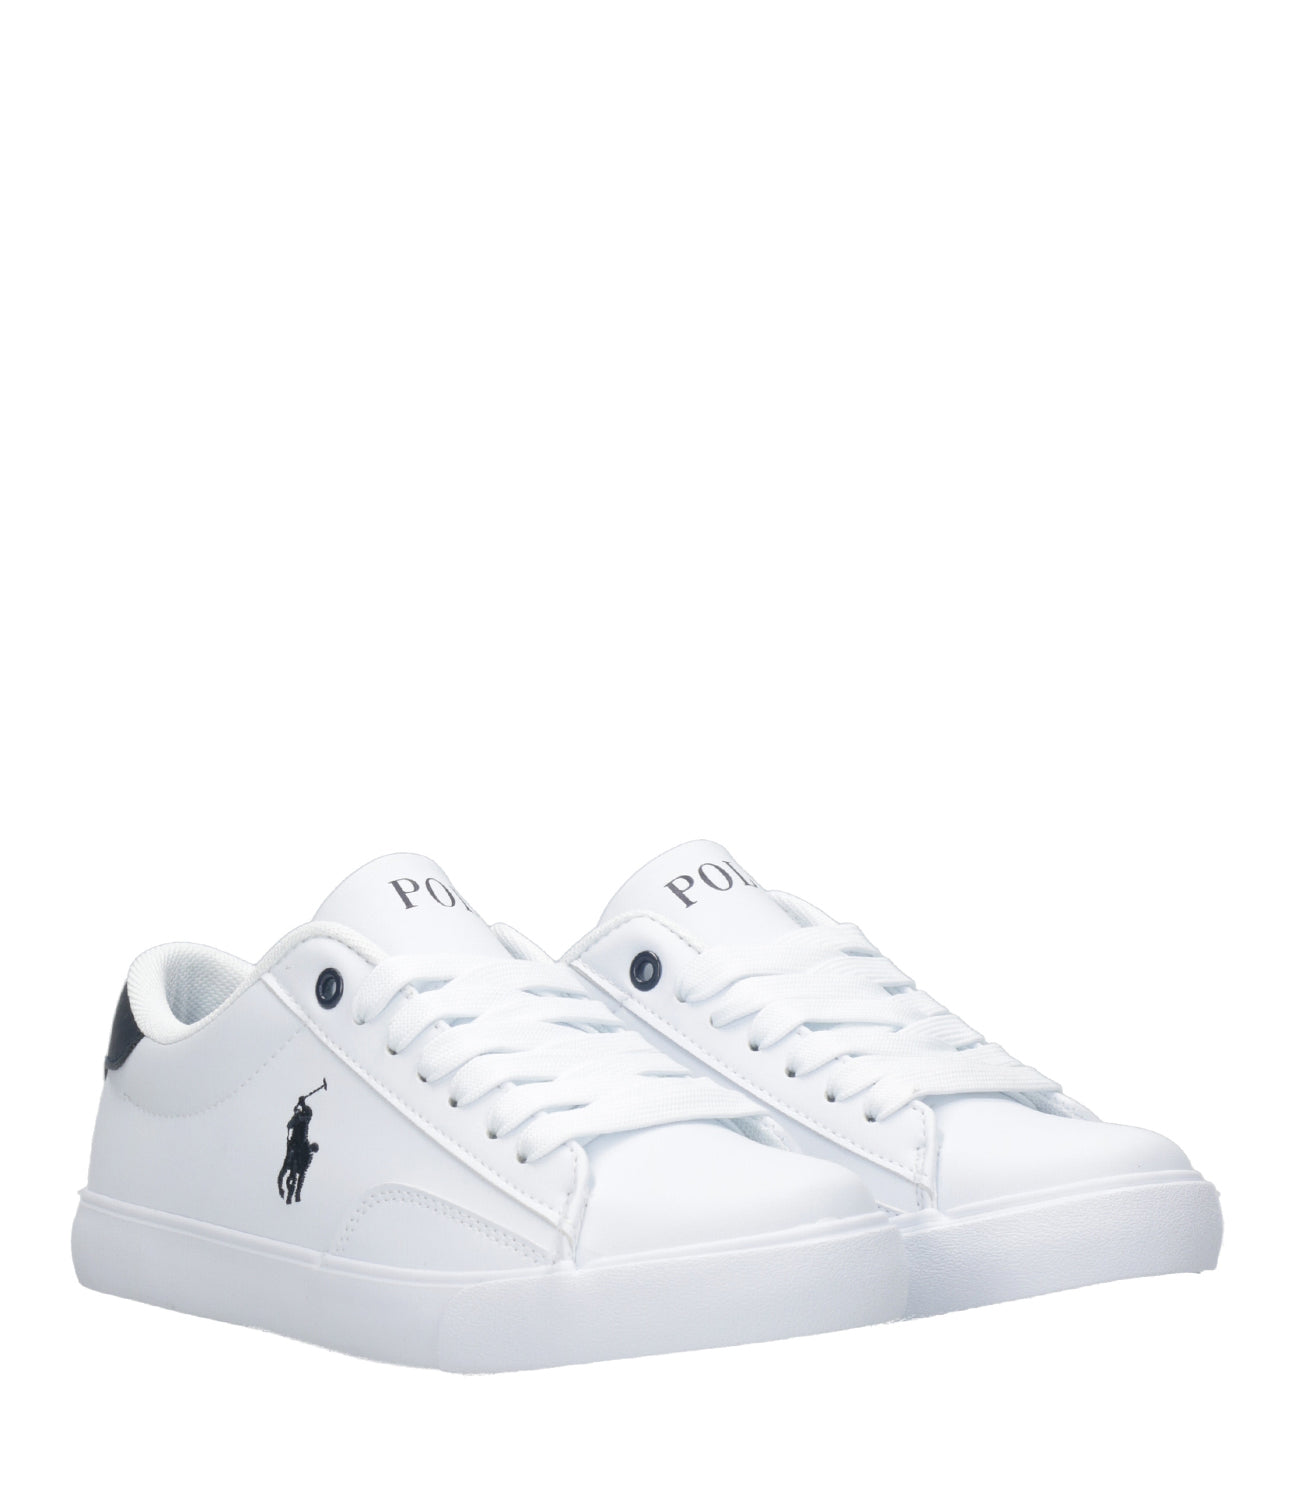 Ralph Lauren Childrenswear | Sneakers Theron V White and Navy Blue